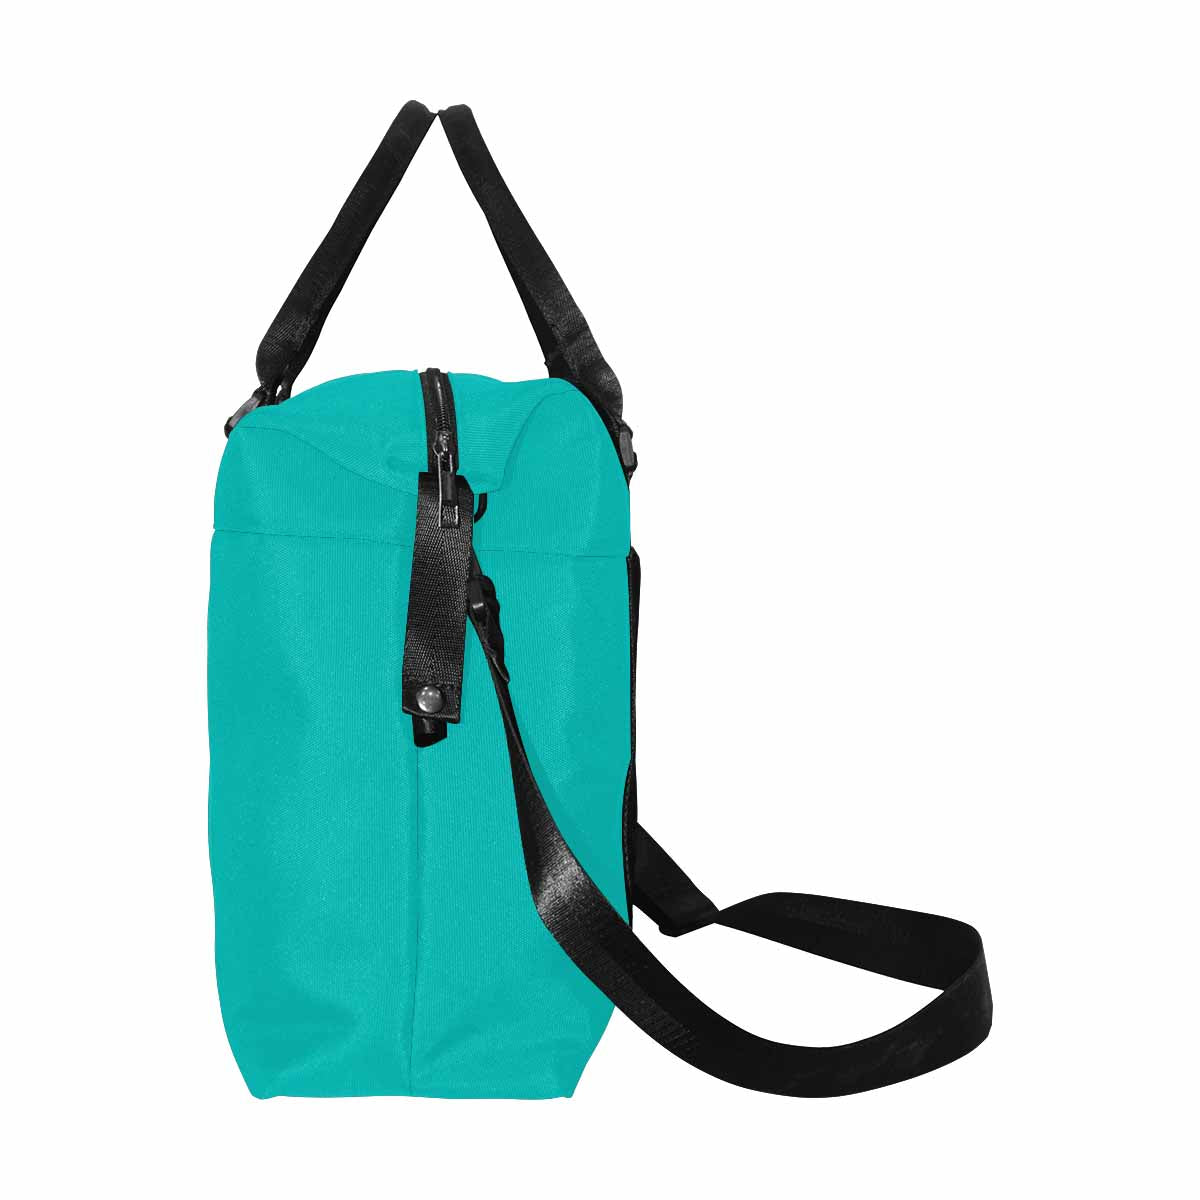 Teal Canvas Carry On